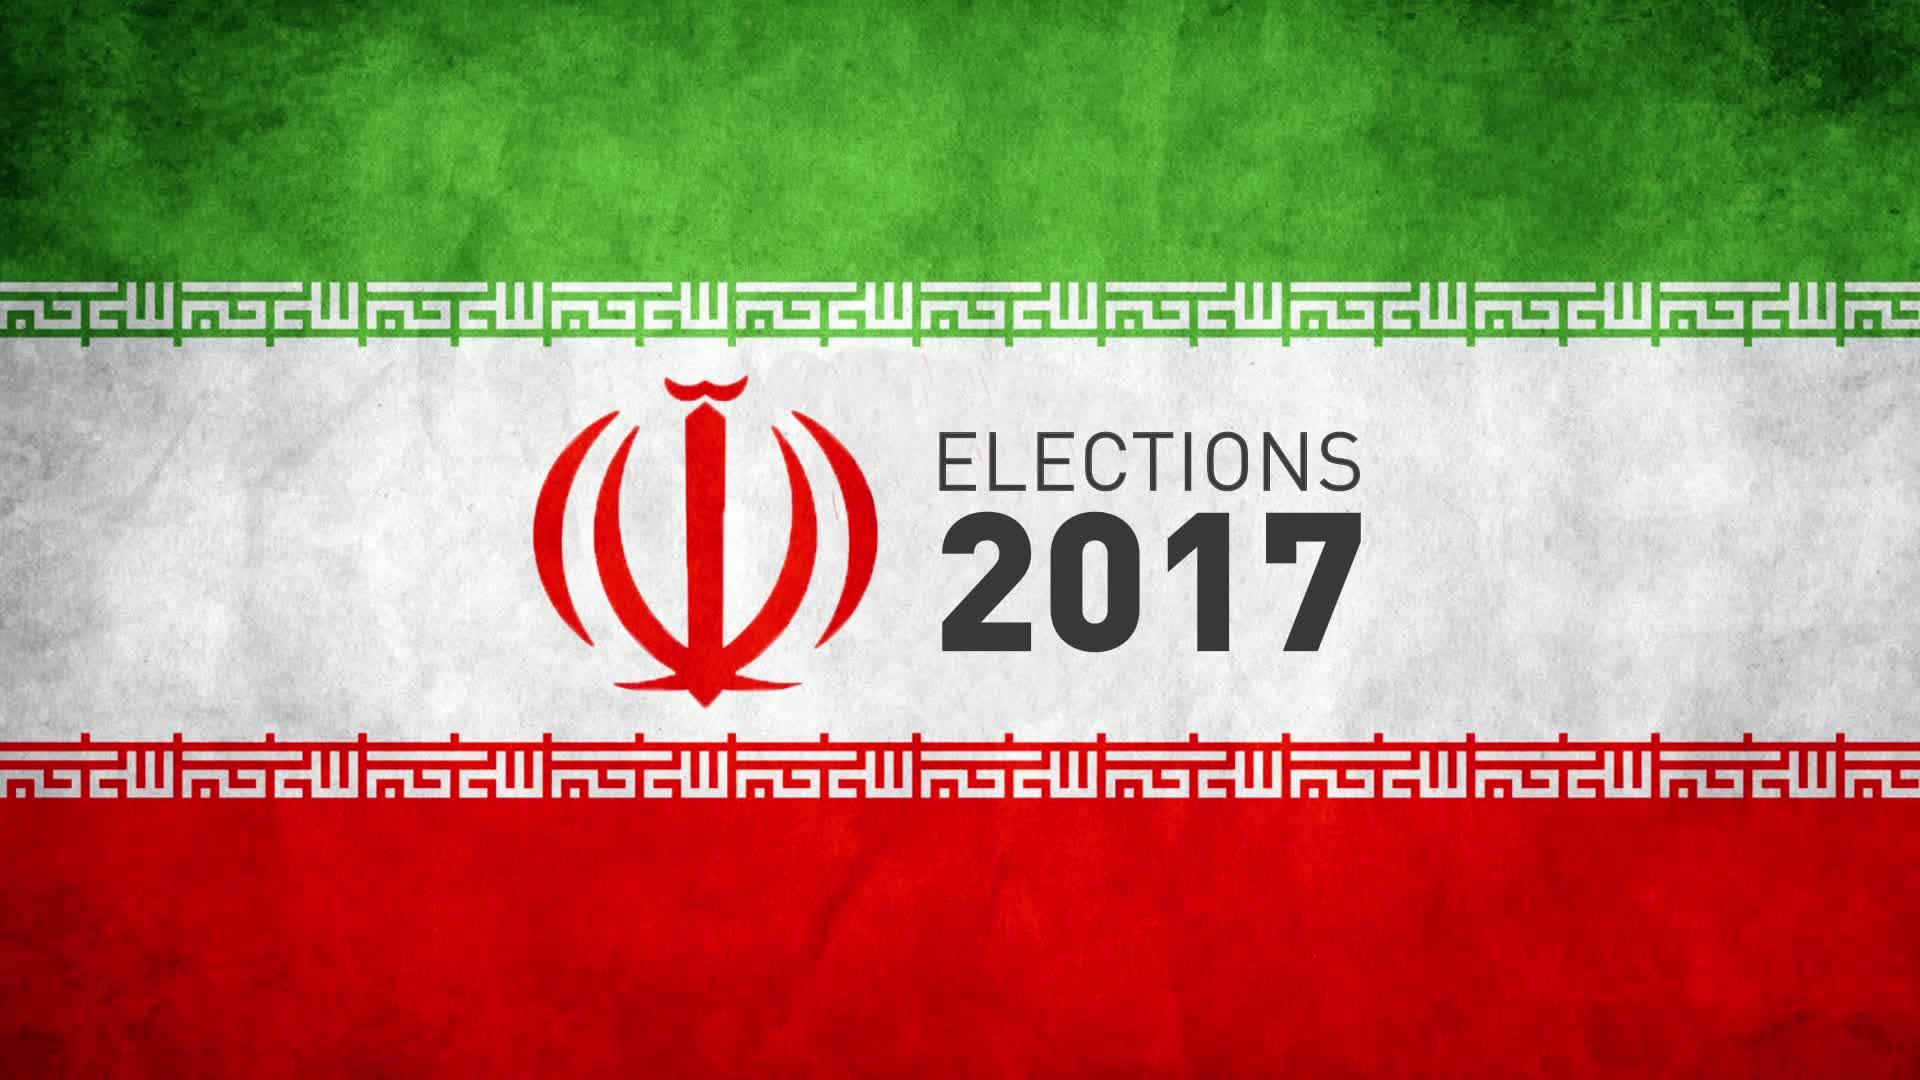 Explainer: Iranian presidential election and the issues